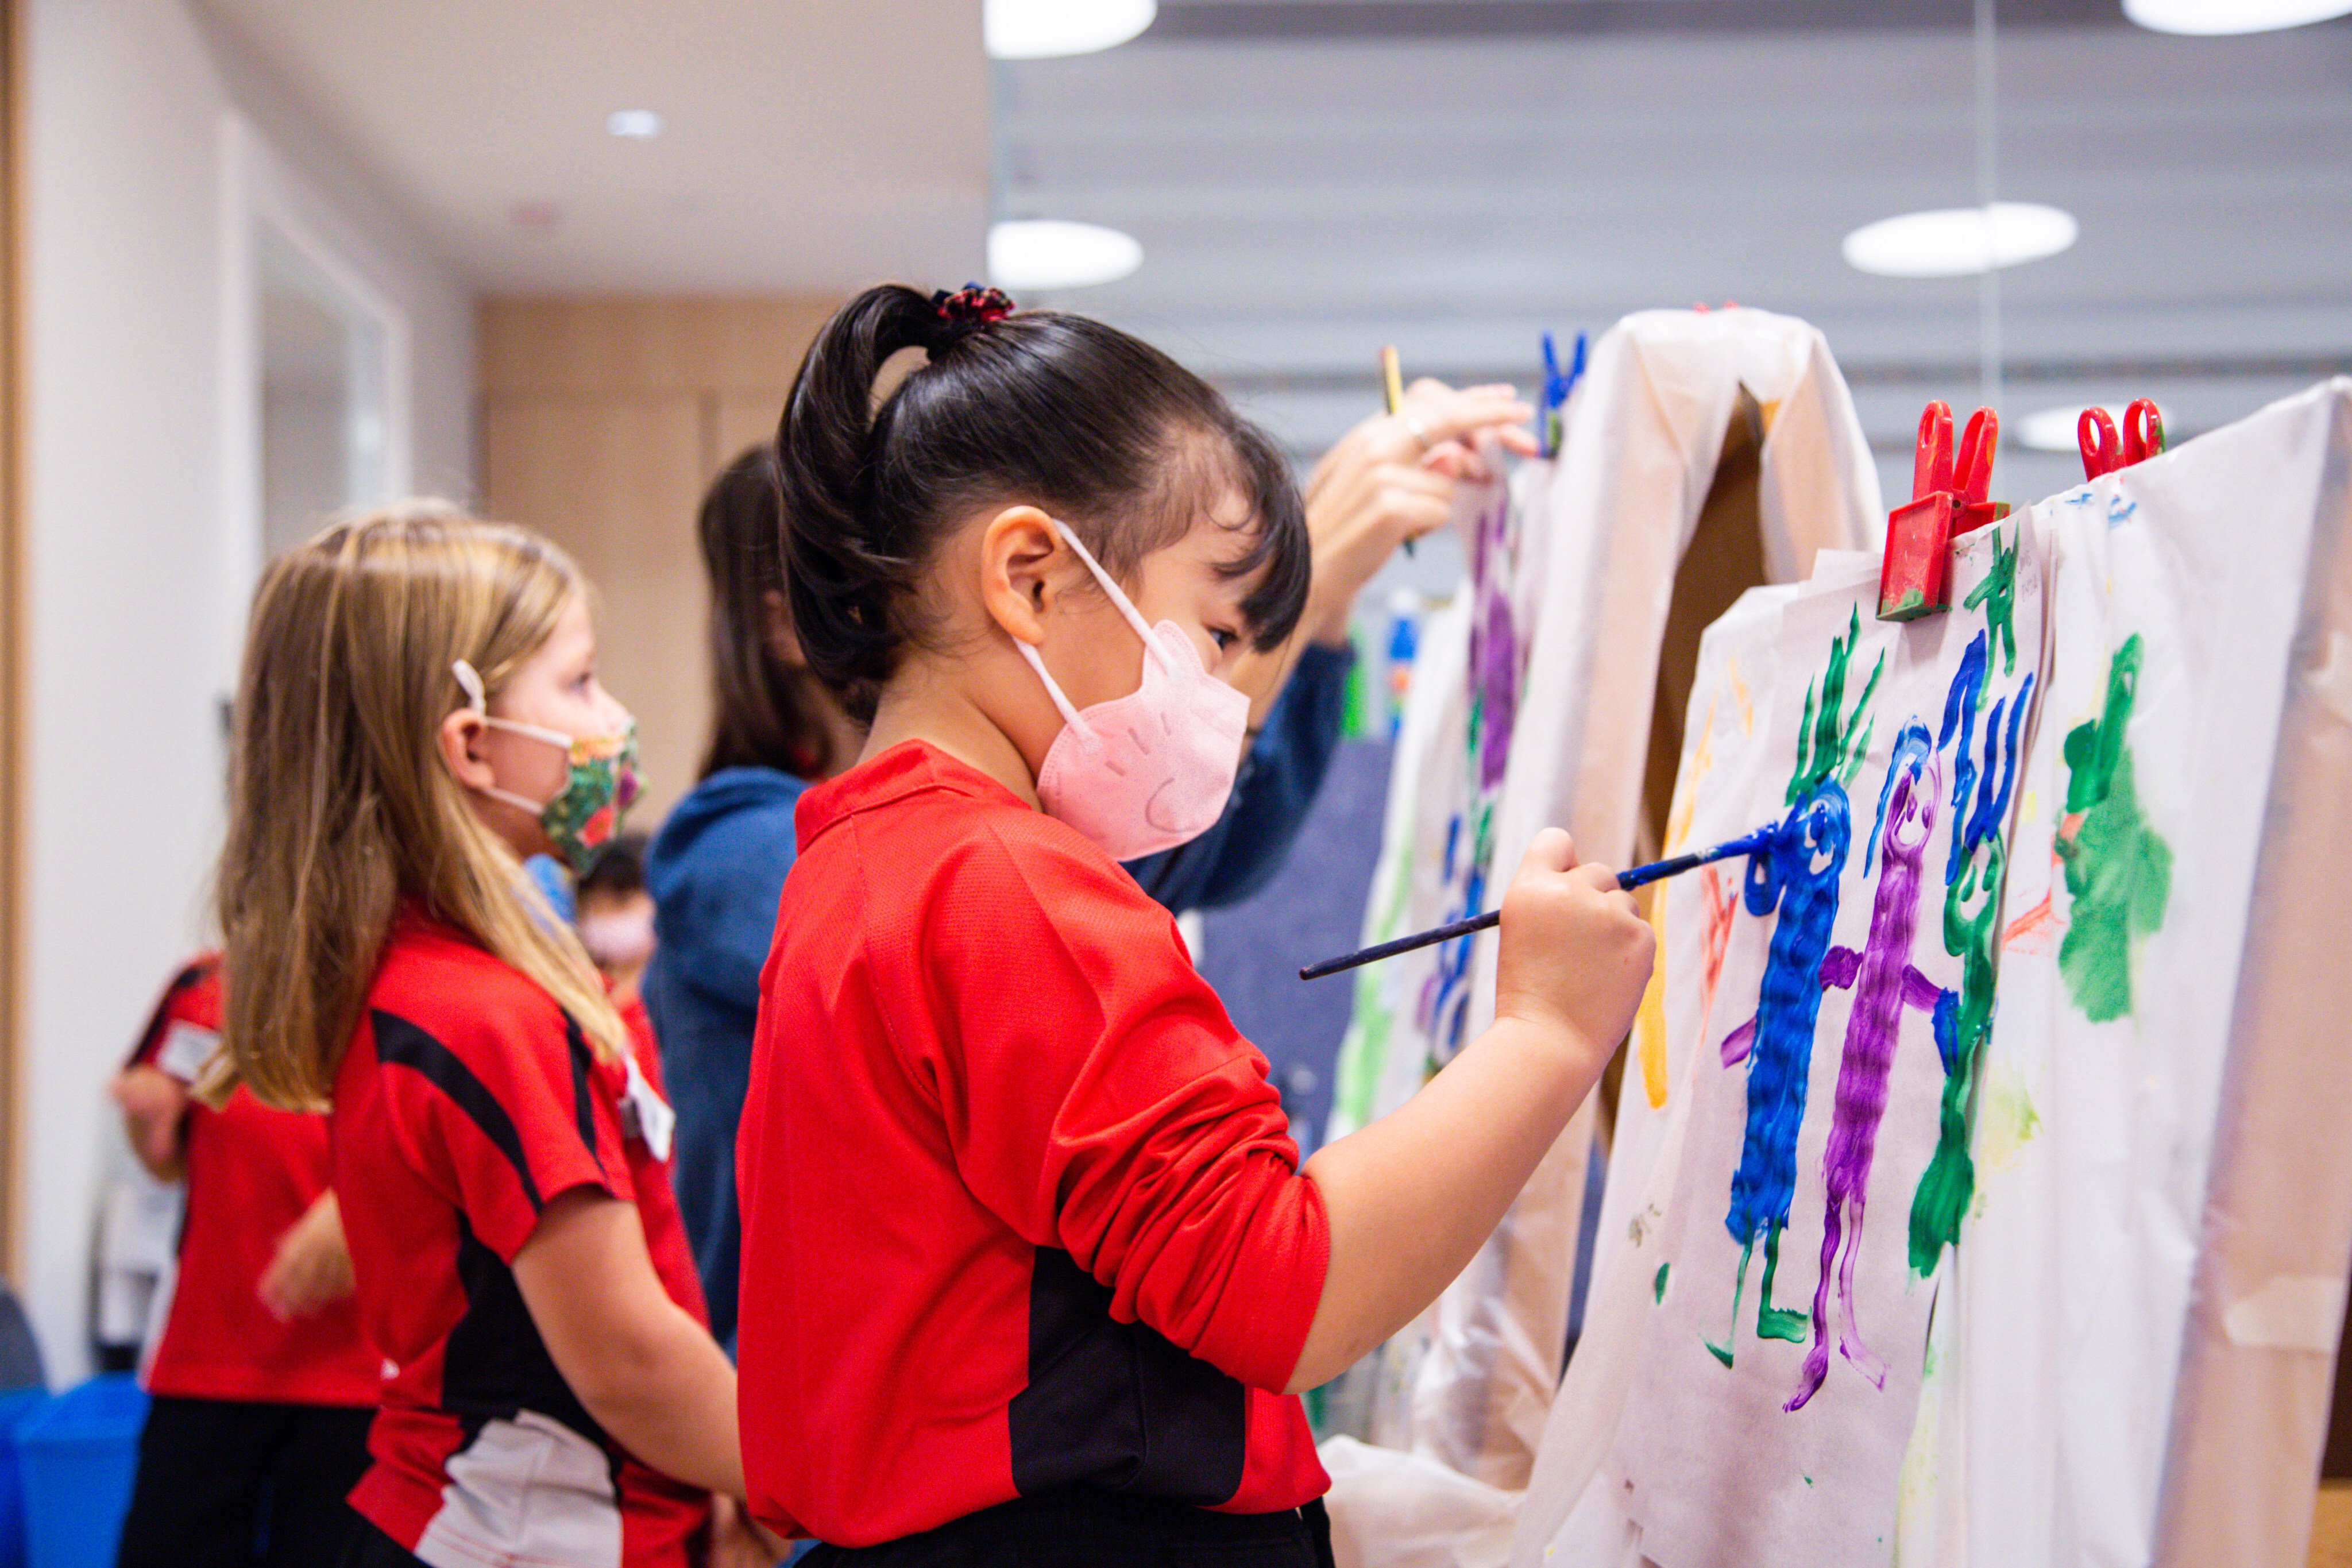 Art can bring more colour and joy to a child’s educational journey, as demonstrated by pupils painting during an art class at CDNIS. Photo: Handout